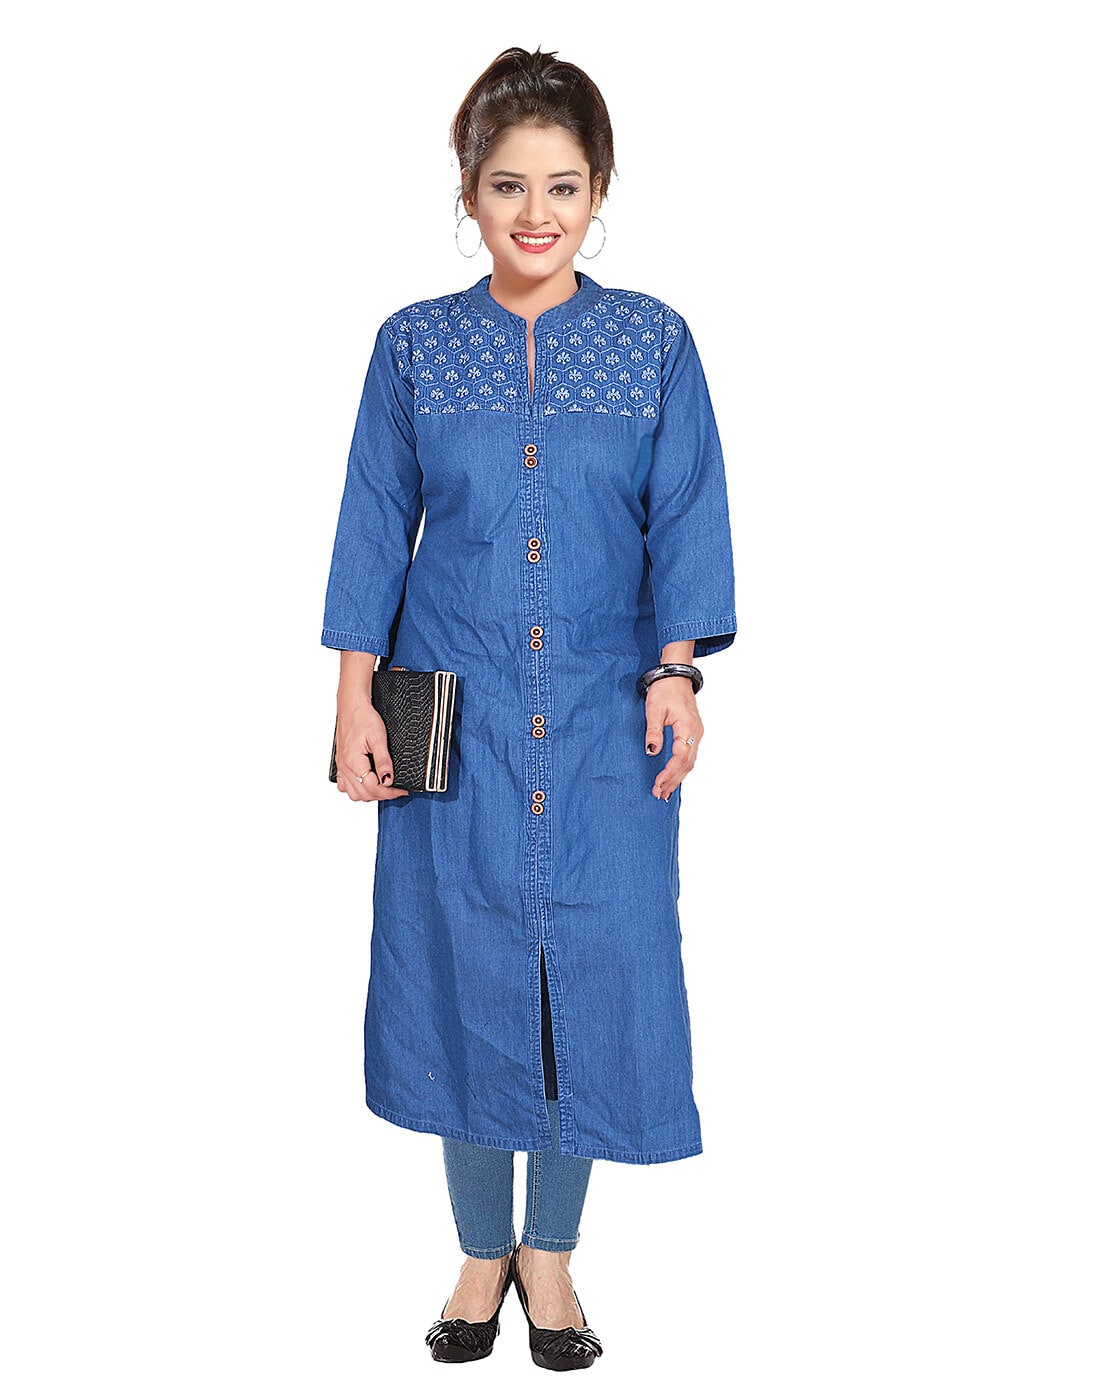 Pure Cotton Denim Kurti at Rs.730/Piece in surat offer by Global Enterprise